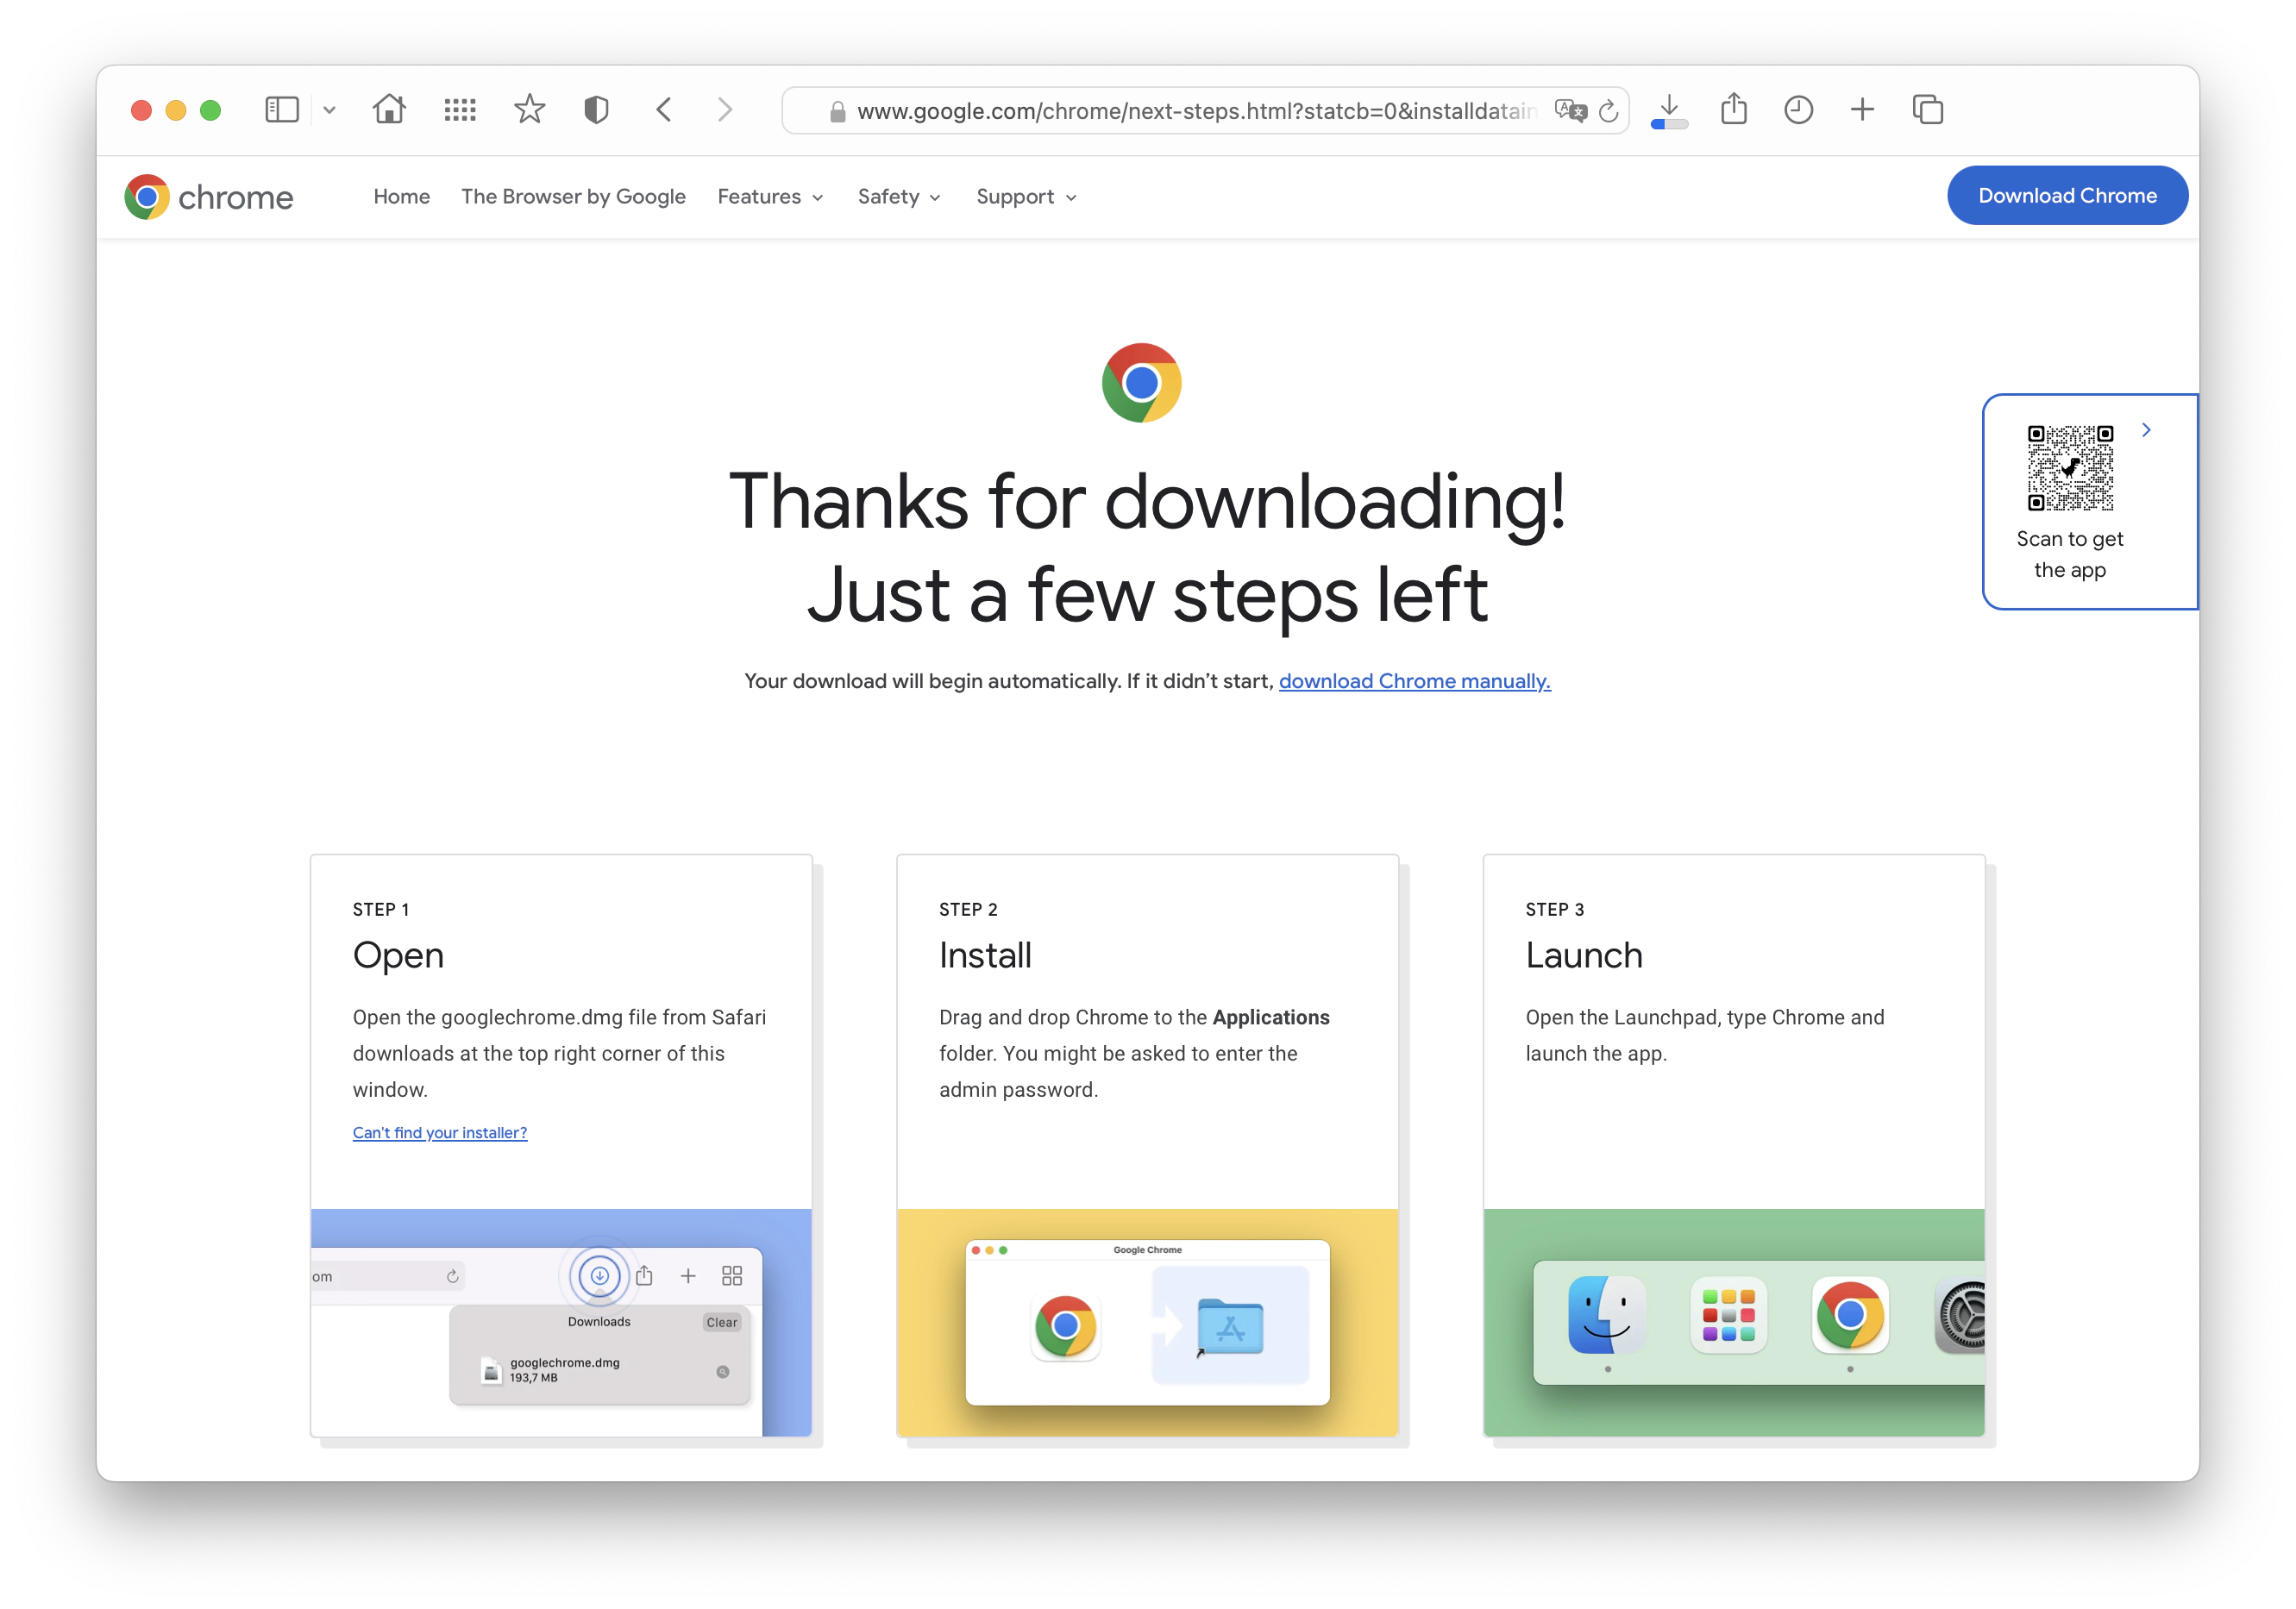 Download Chrome manually